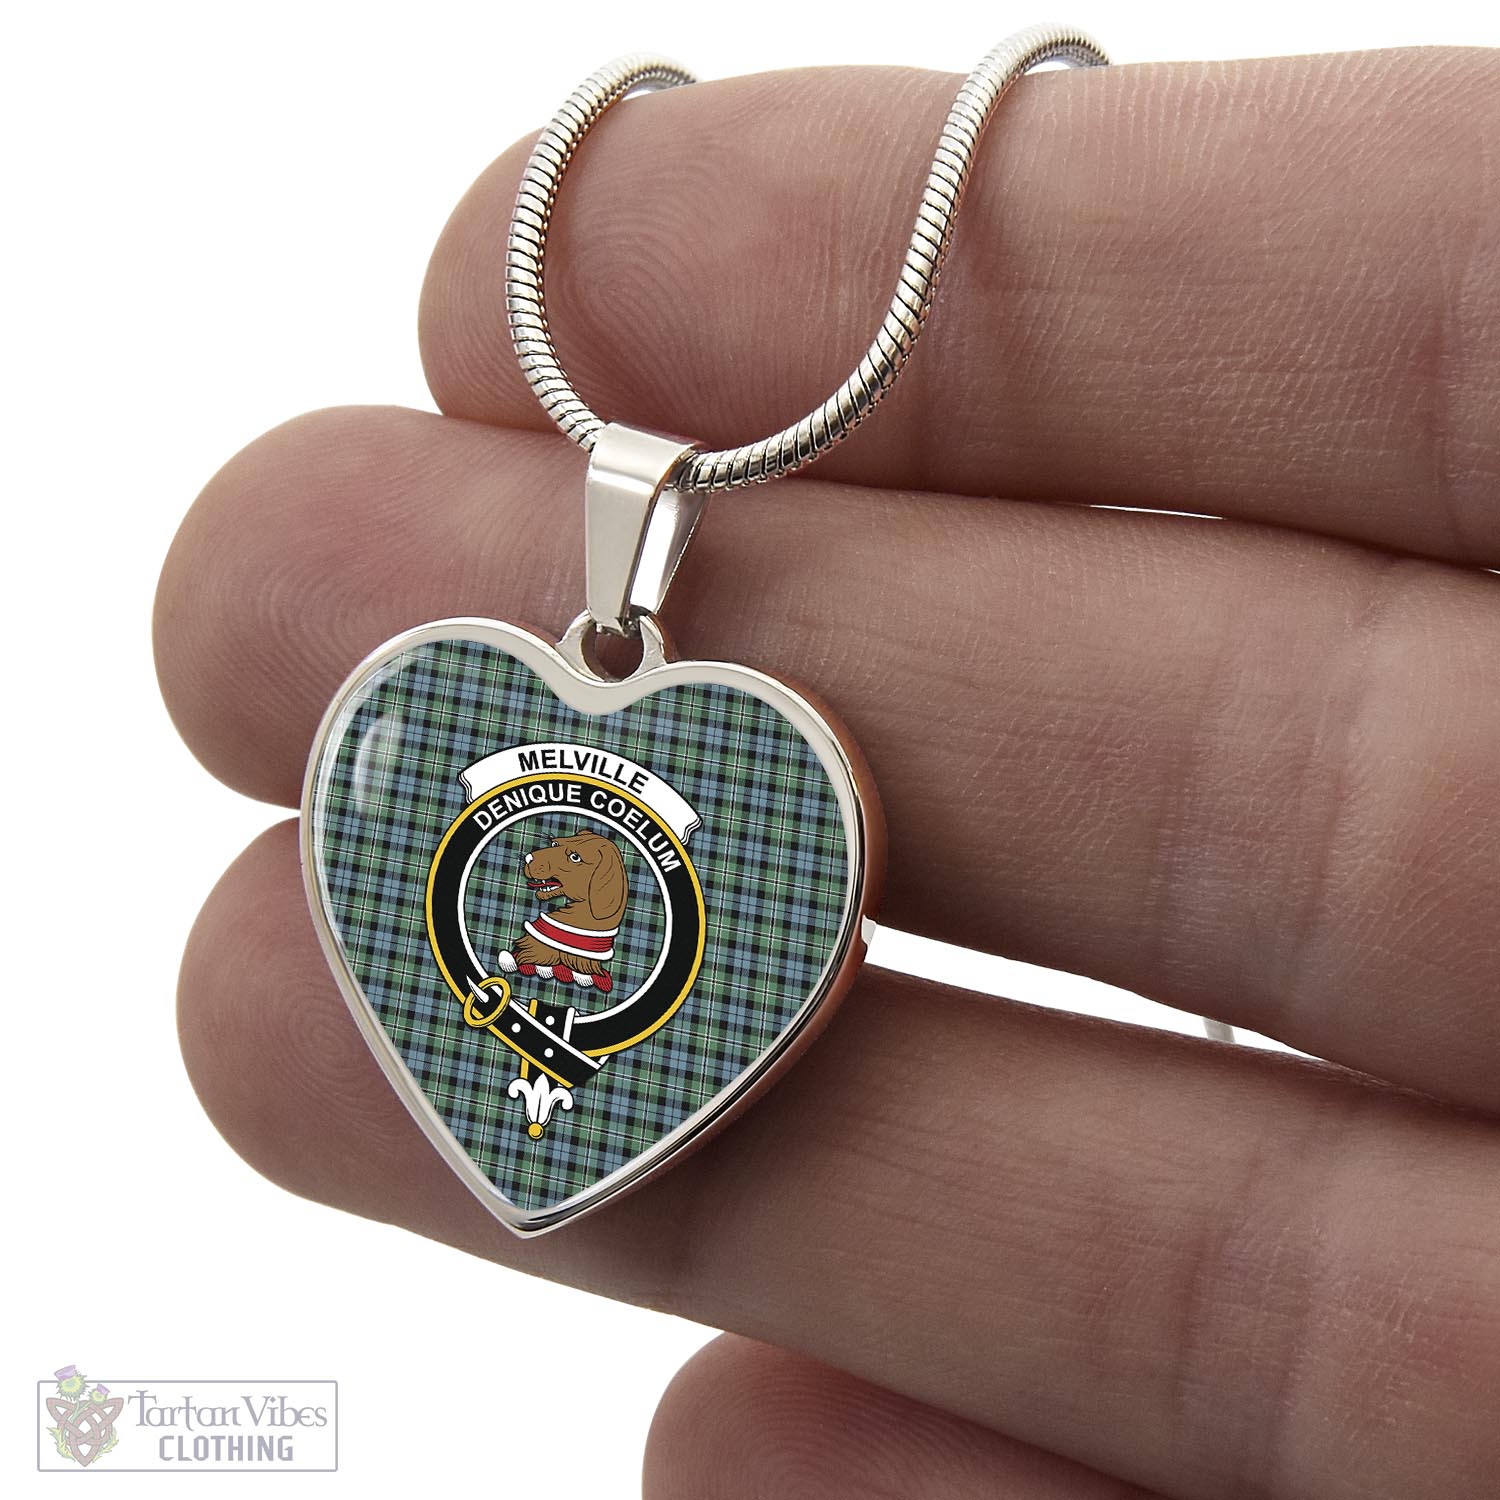 Tartan Vibes Clothing Melville Ancient Tartan Heart Necklace with Family Crest